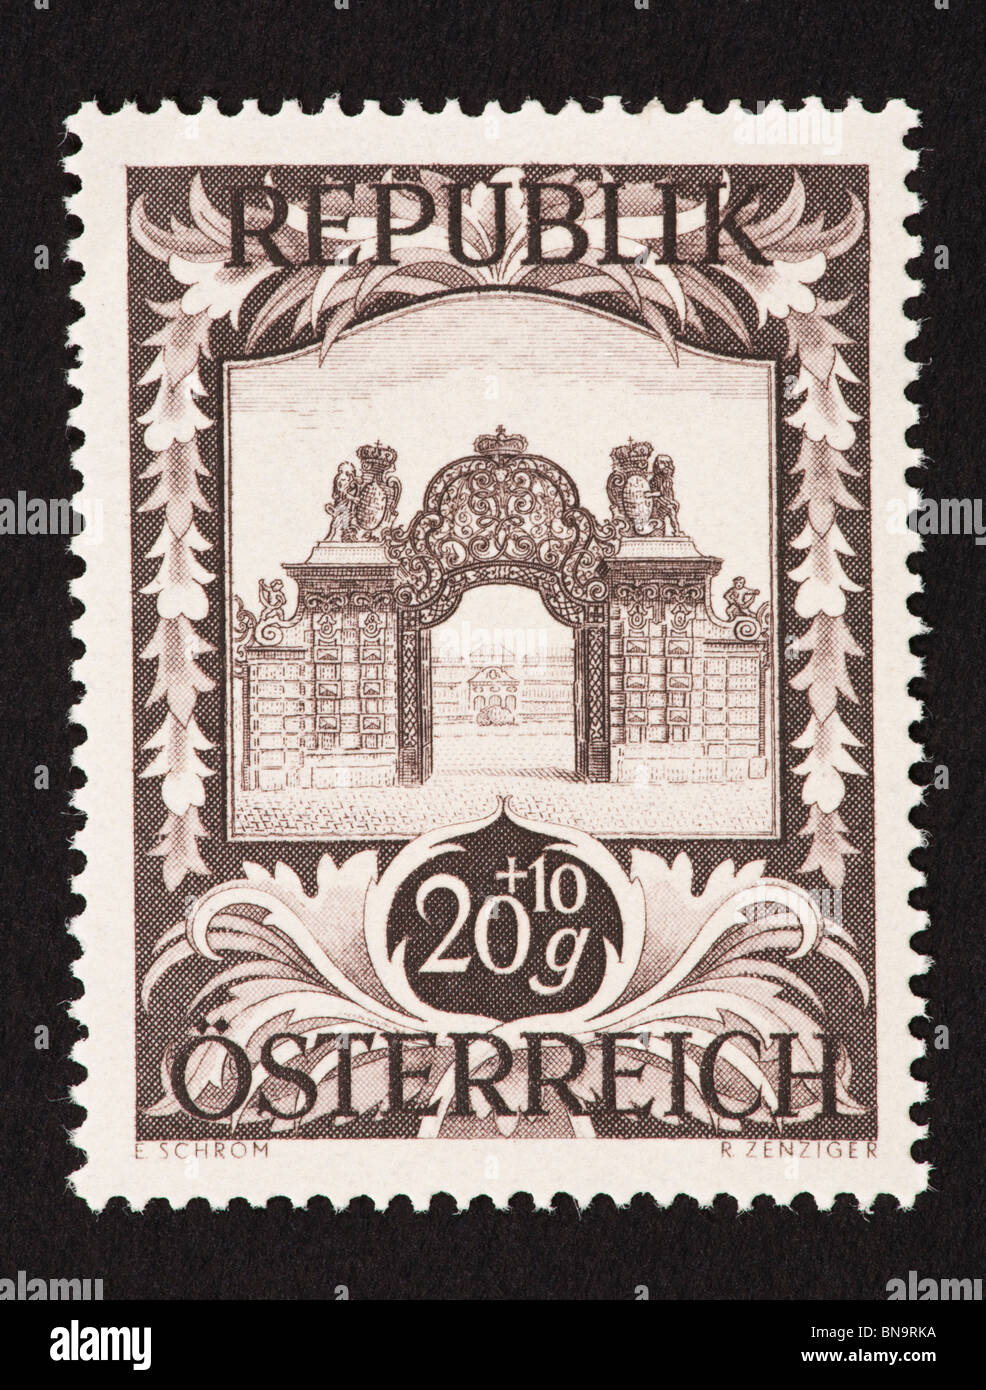 Postage stamp from Austria depicting the Entrance Gate at Upper Belvedere Palace. Stock Photo